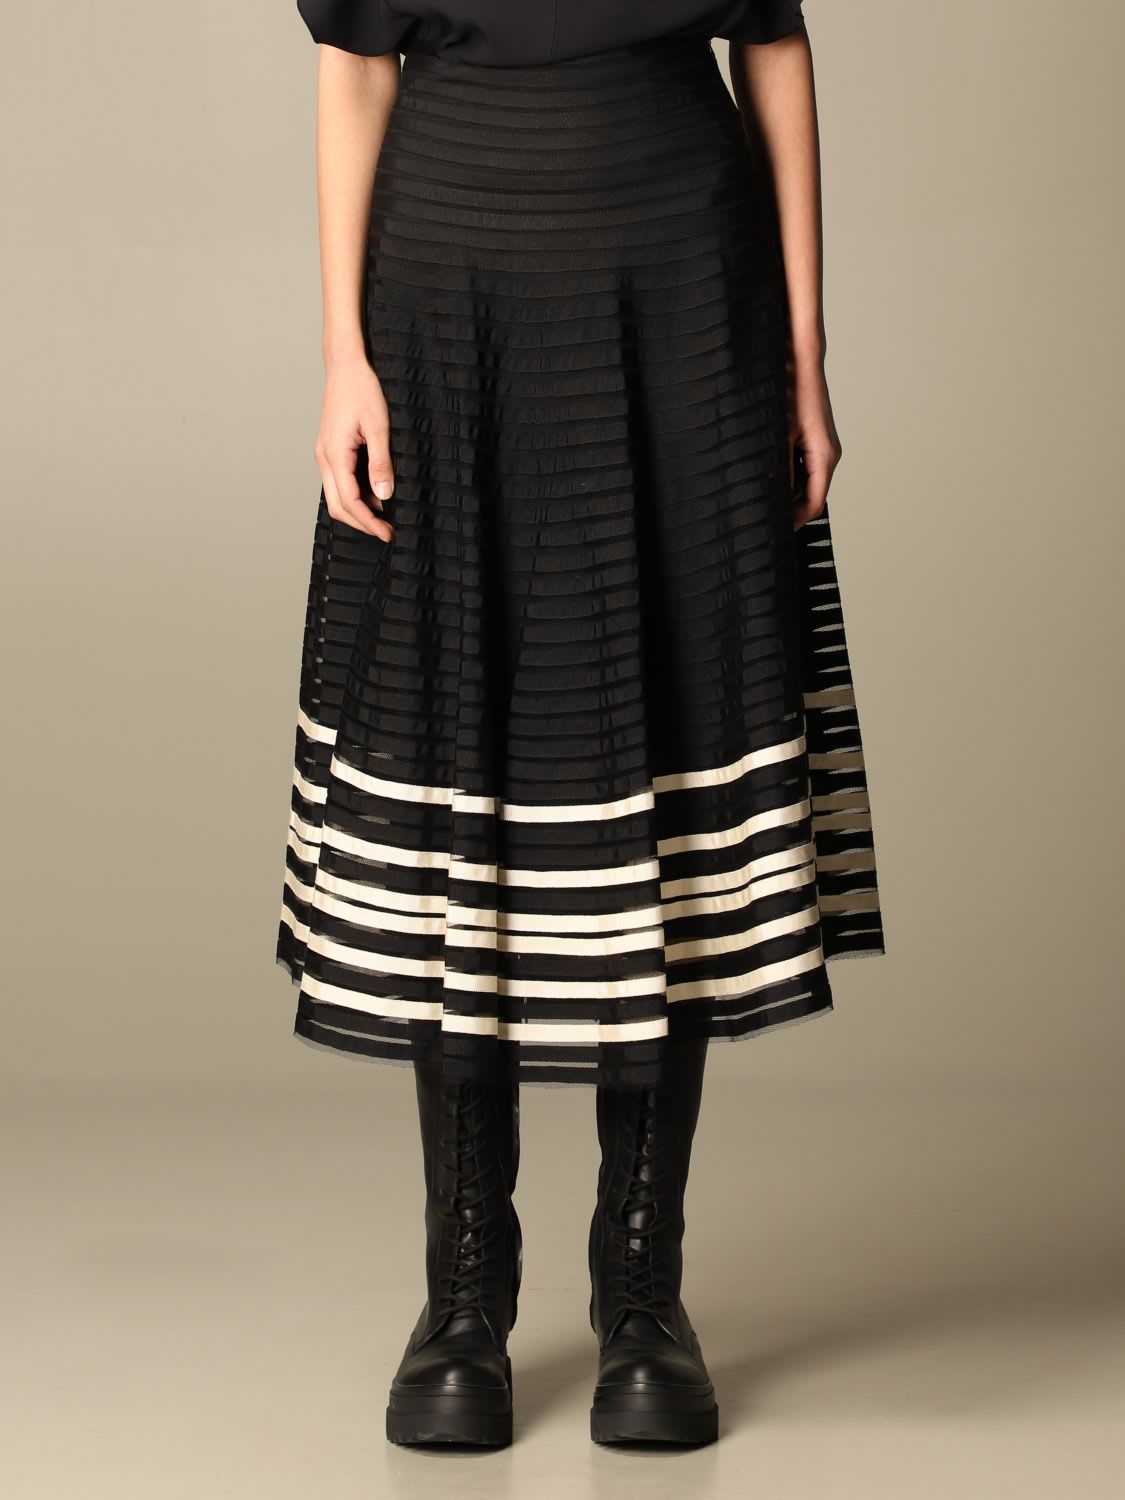 Red Valentino Skirt Red Valentino Midi Skirt With Grosgrain Ribbons On Tulle